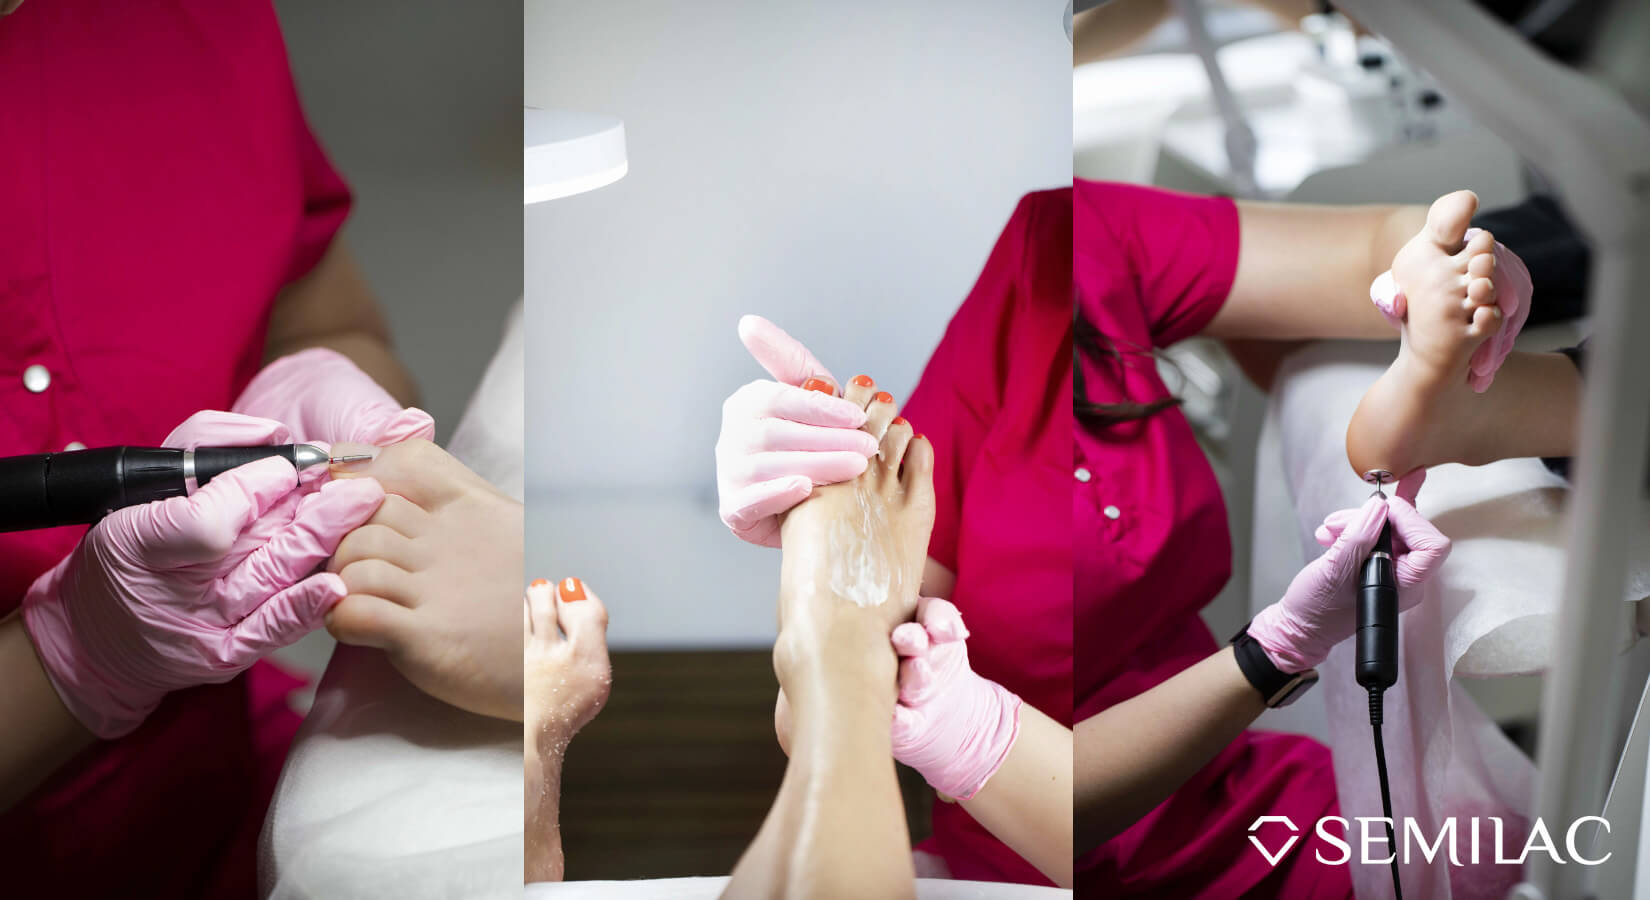 Milling Pedicure - How to Do Pedicure Step by Step?